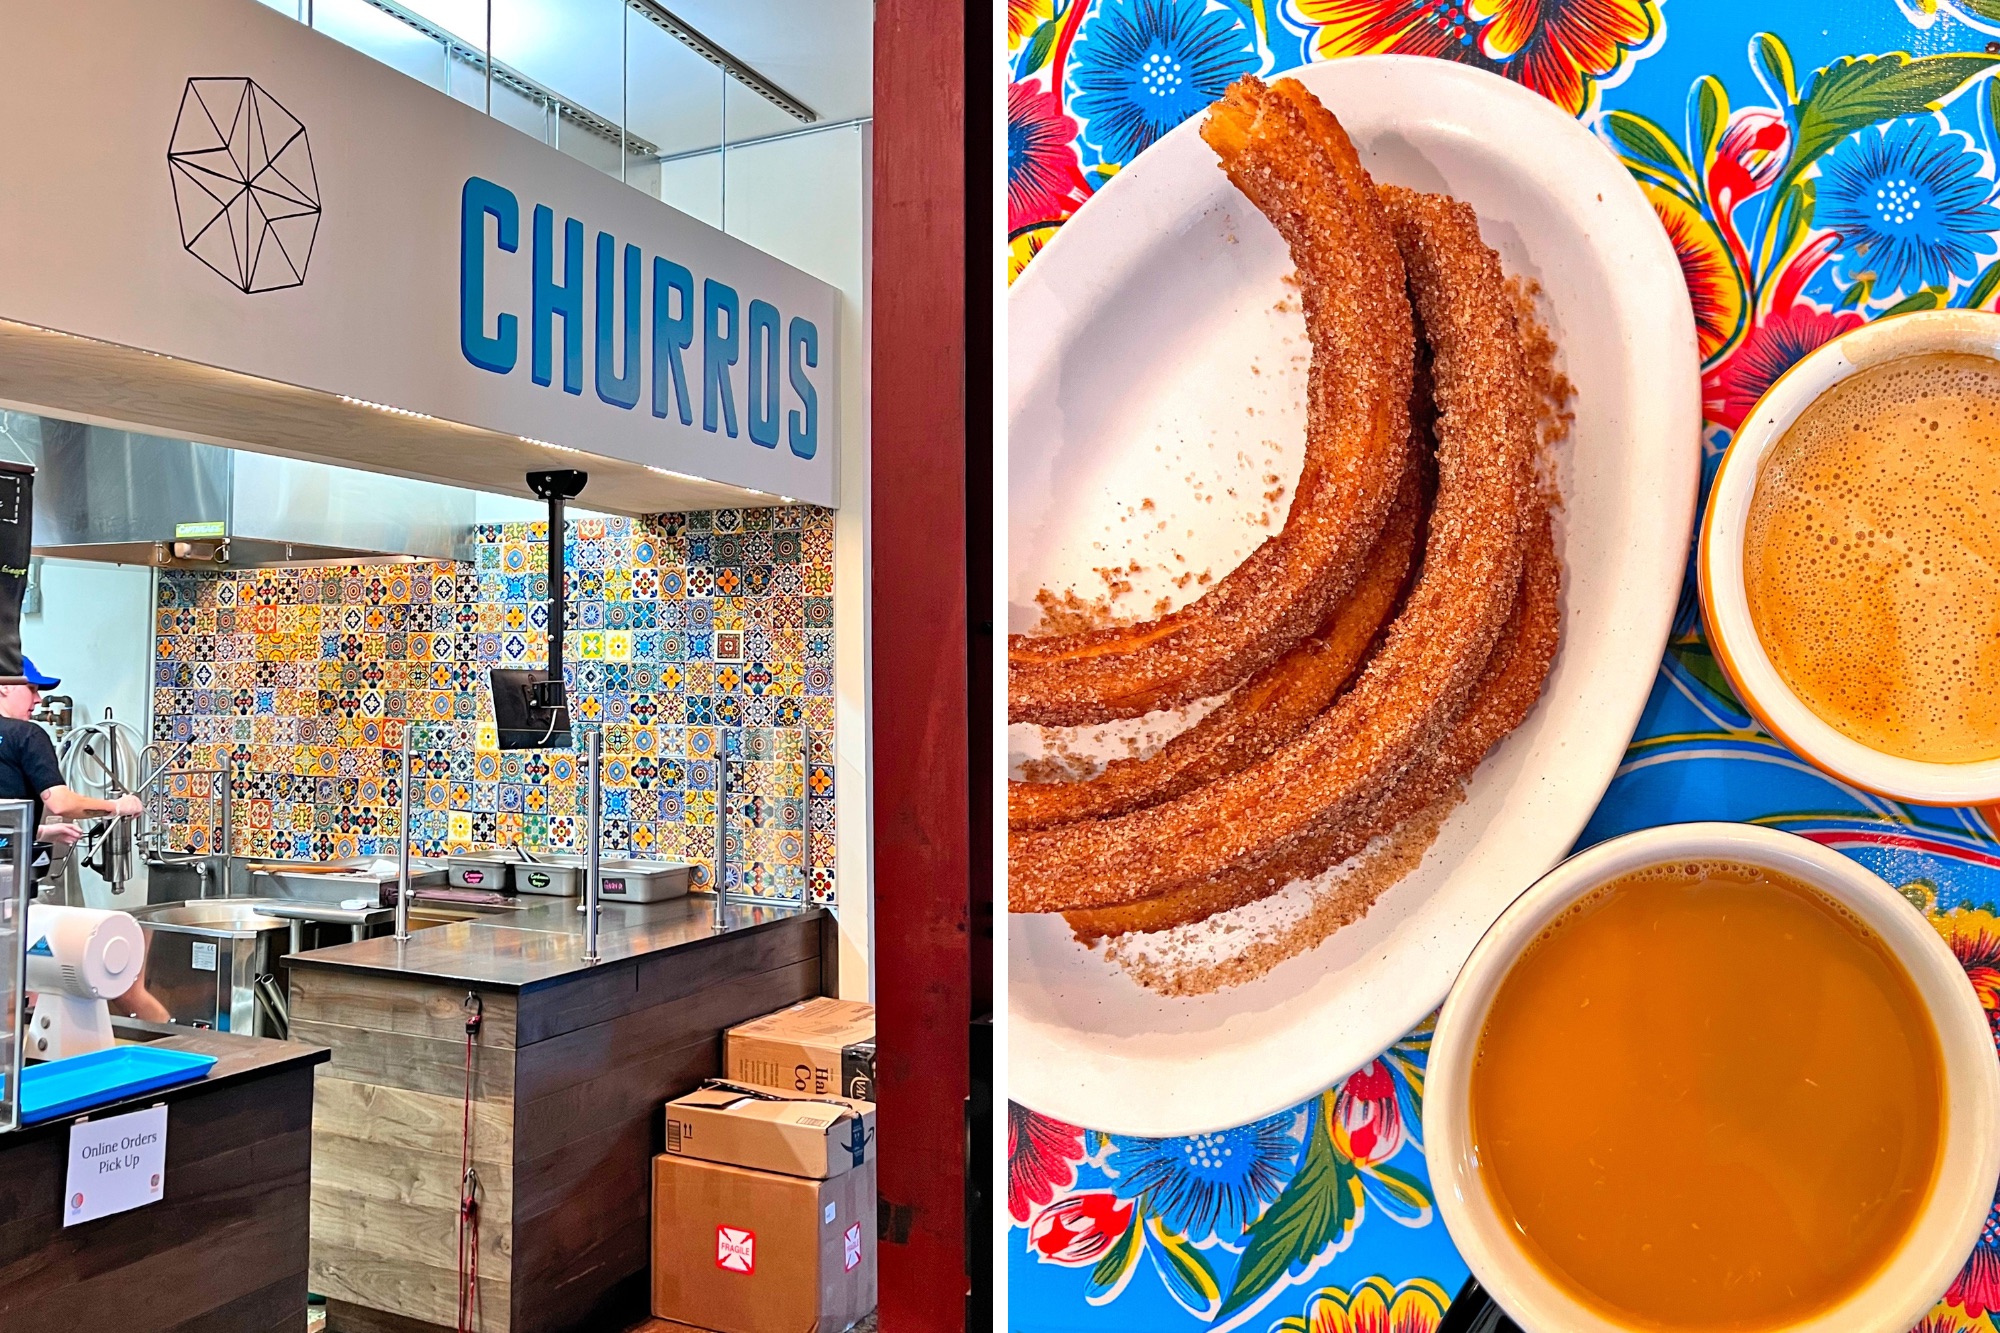 A sign that reads "Churros" and a plate of churros and coffee